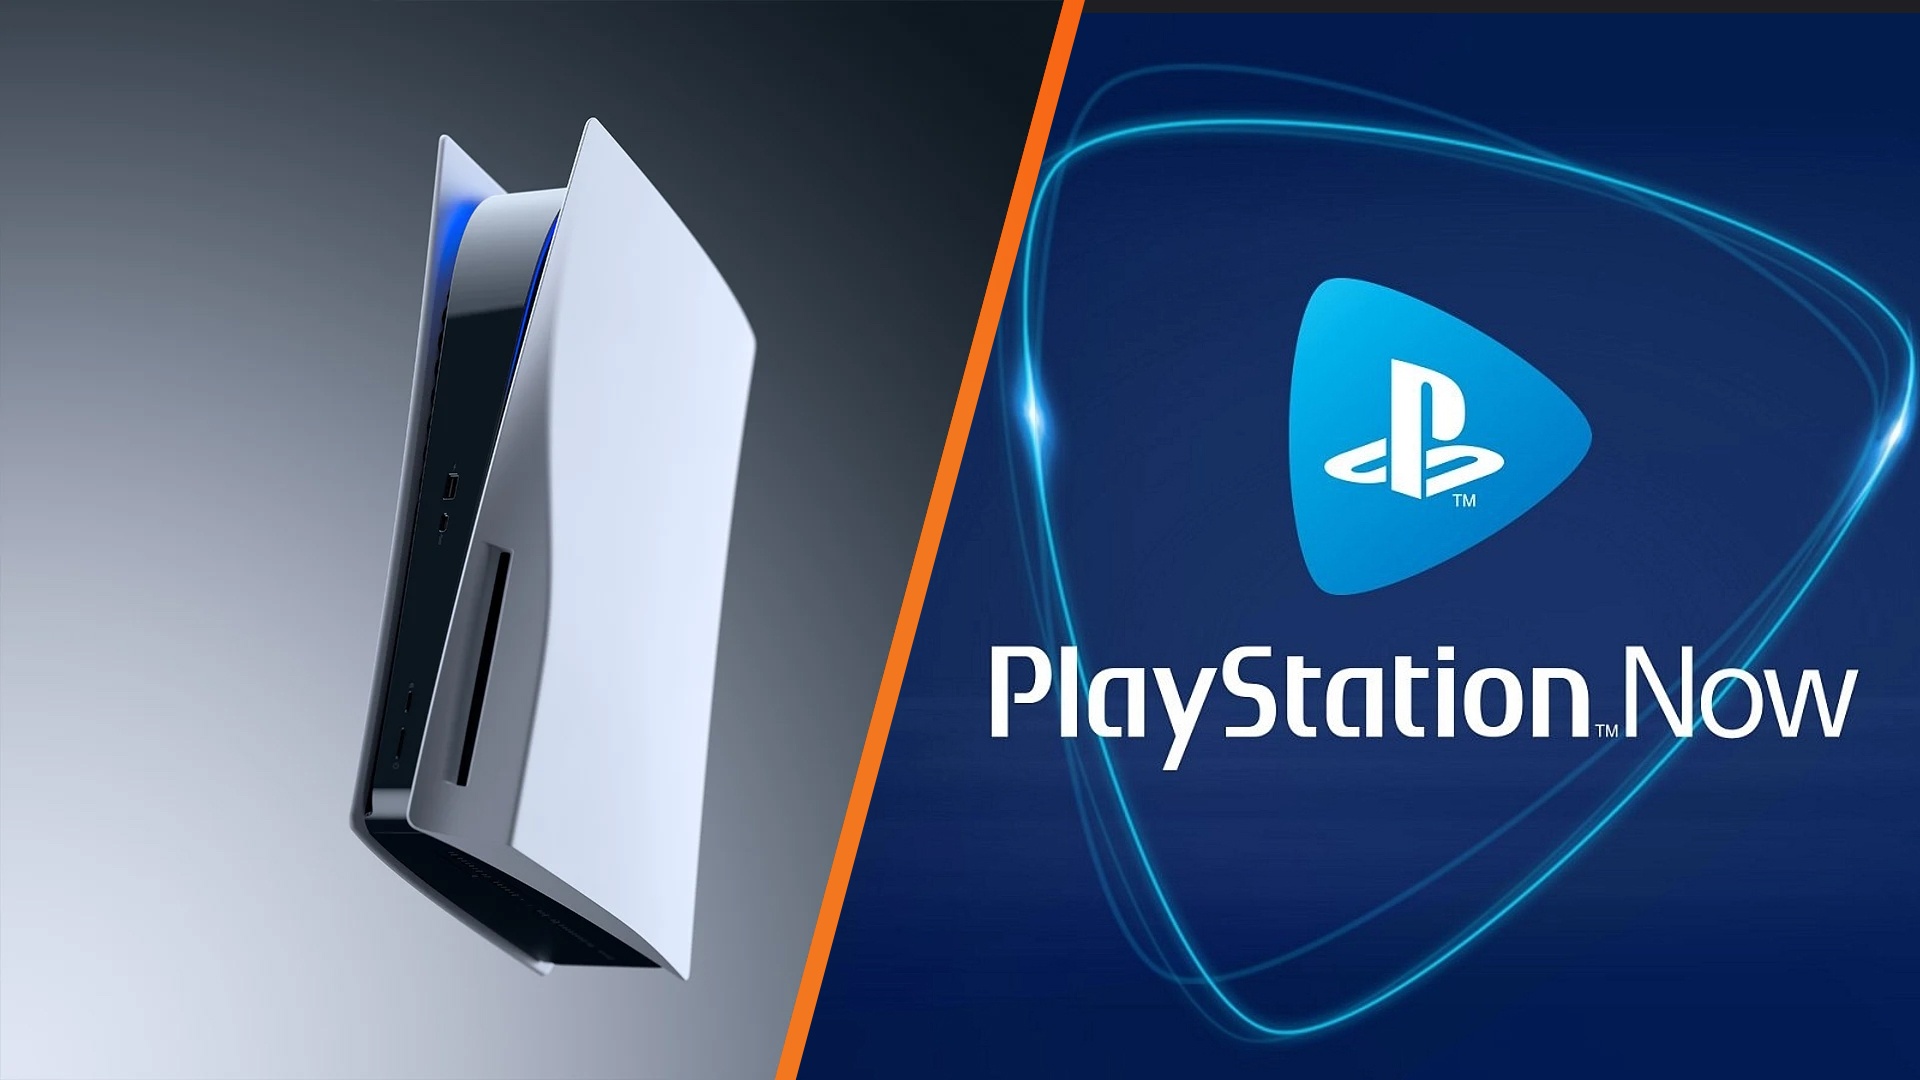 PlayStation Now game streaming is coming to PC